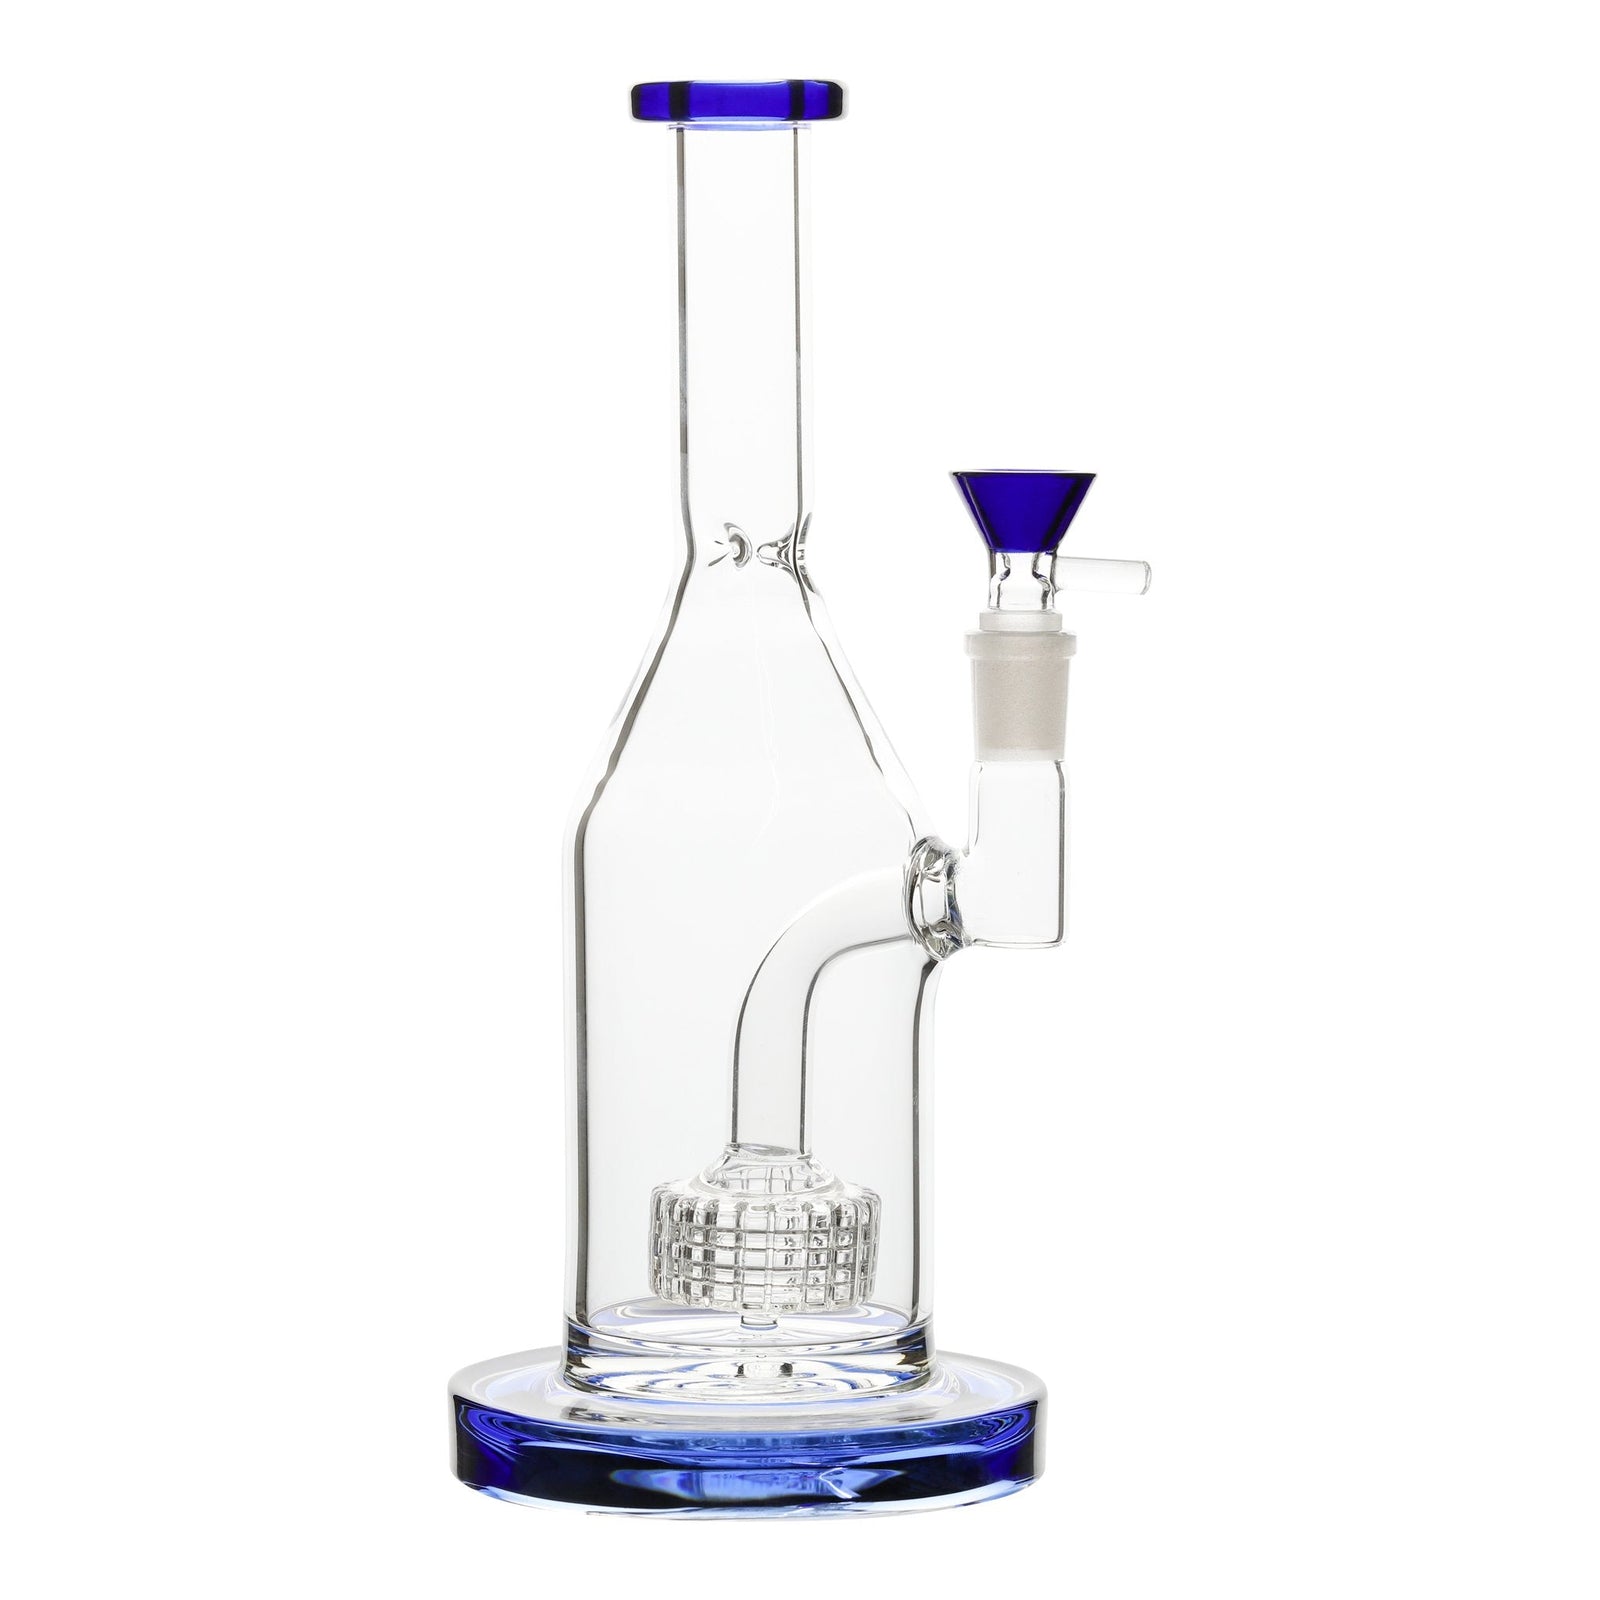 Bongs vs dab rigs: get to know your cannabis gear